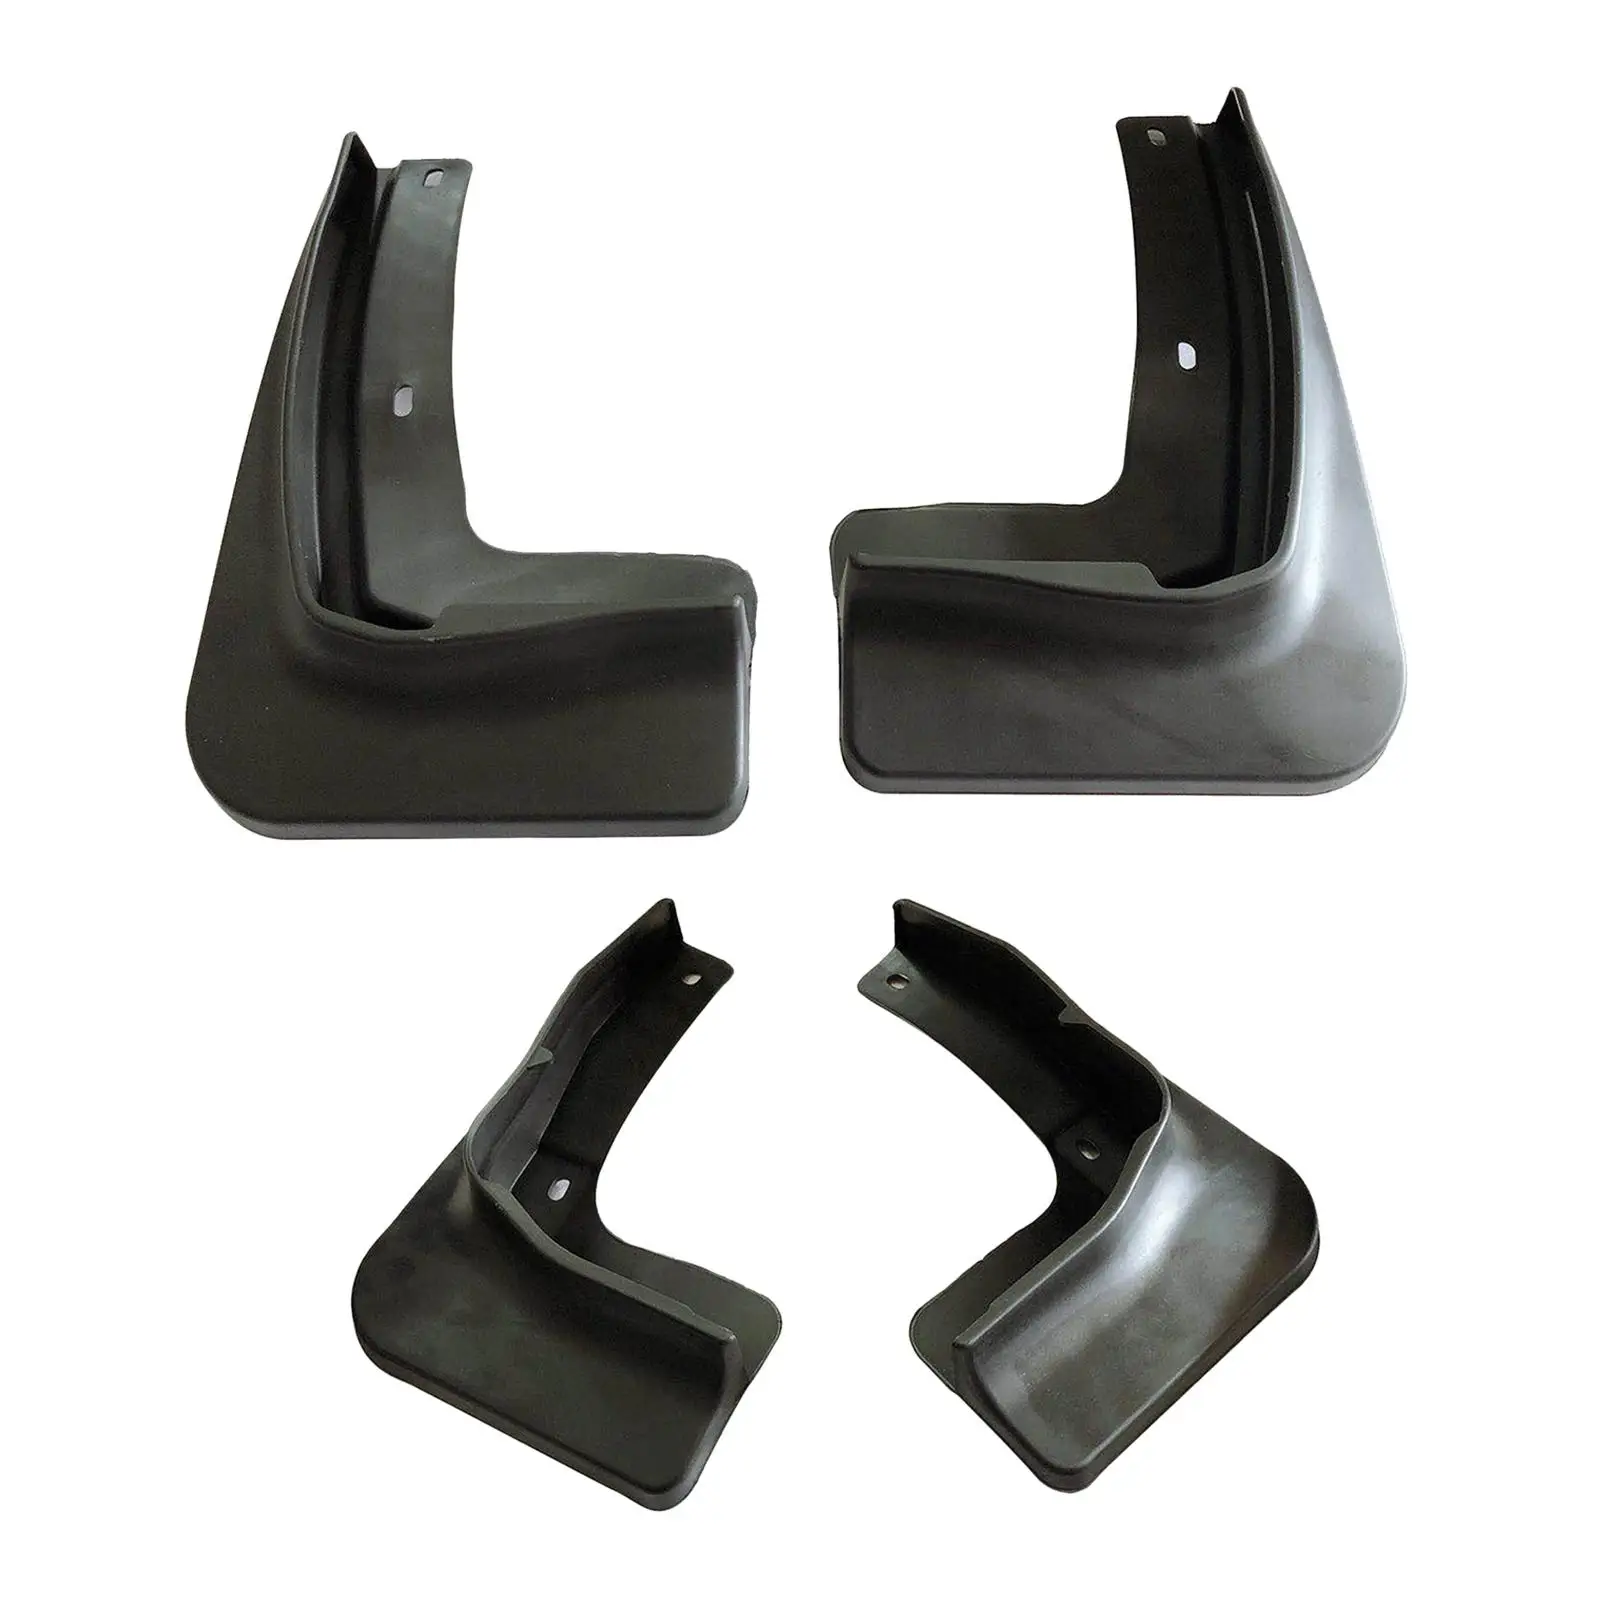 4x Car Mudguard Muds Flaps Durable Easy to Install Professional Fenders Accessories Portable Replacement for Byd Yuan Plus